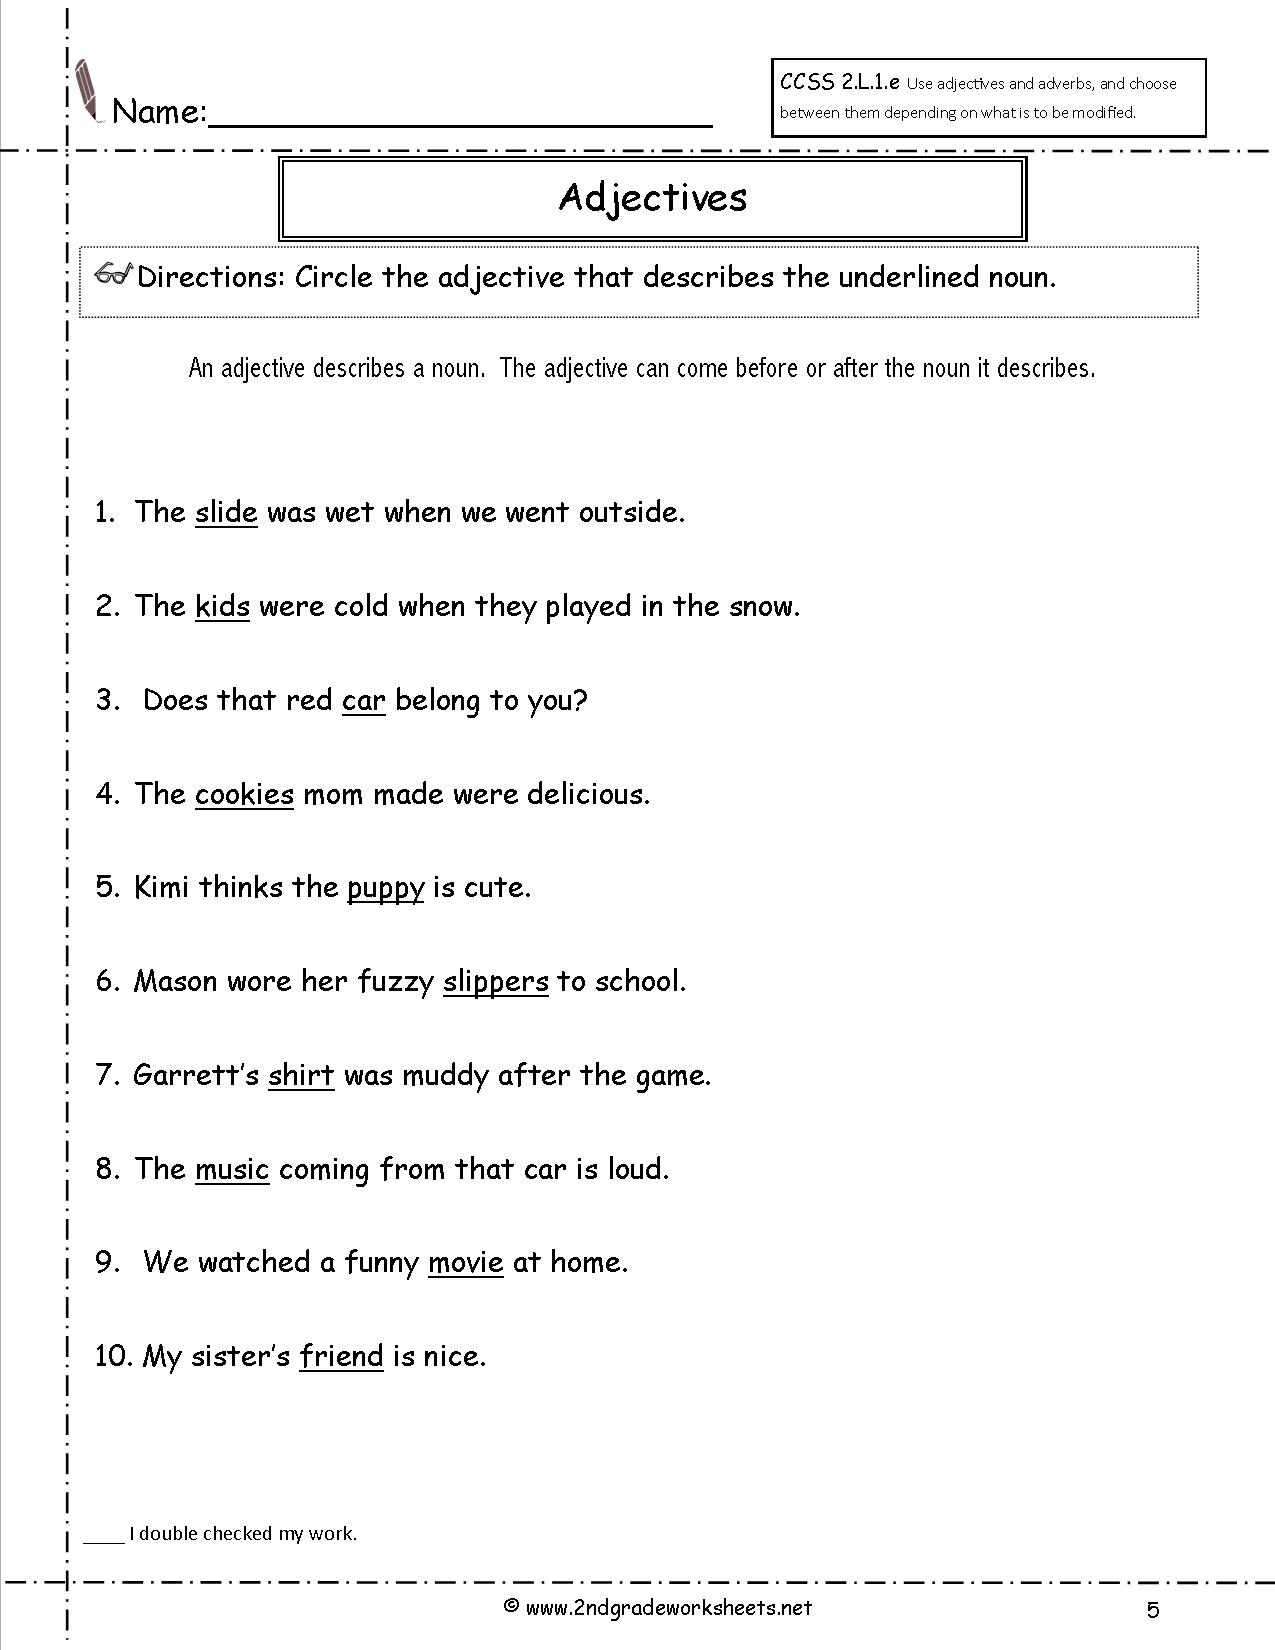 nouns-adjectives-worksheets-for-grade-3-3-your-home-teacher